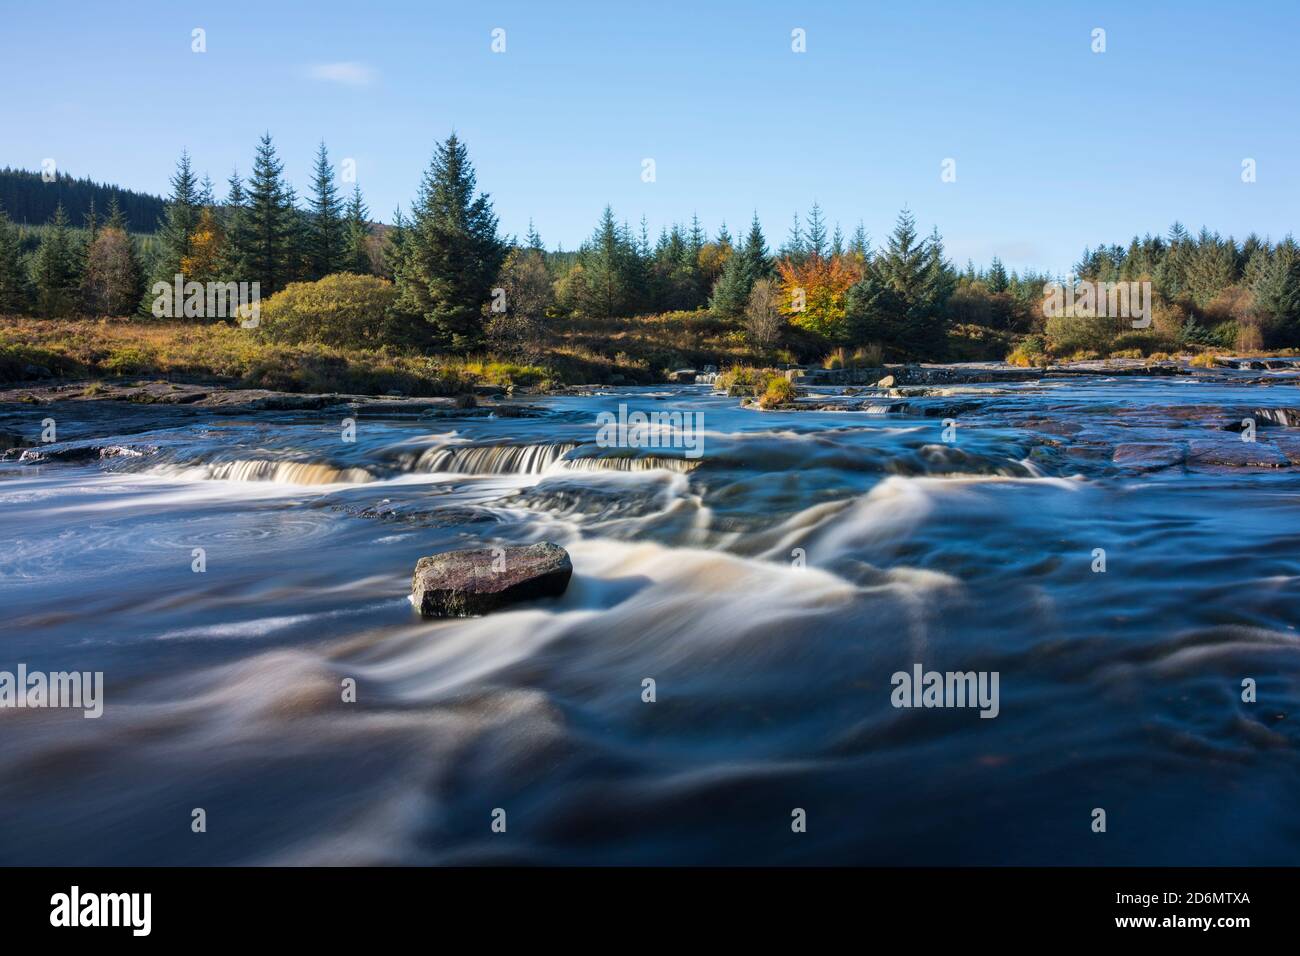 Piscine Otter in autunno, fiume Dee, Galloway Forest, Dumfries & Galloway, Scozia Foto Stock